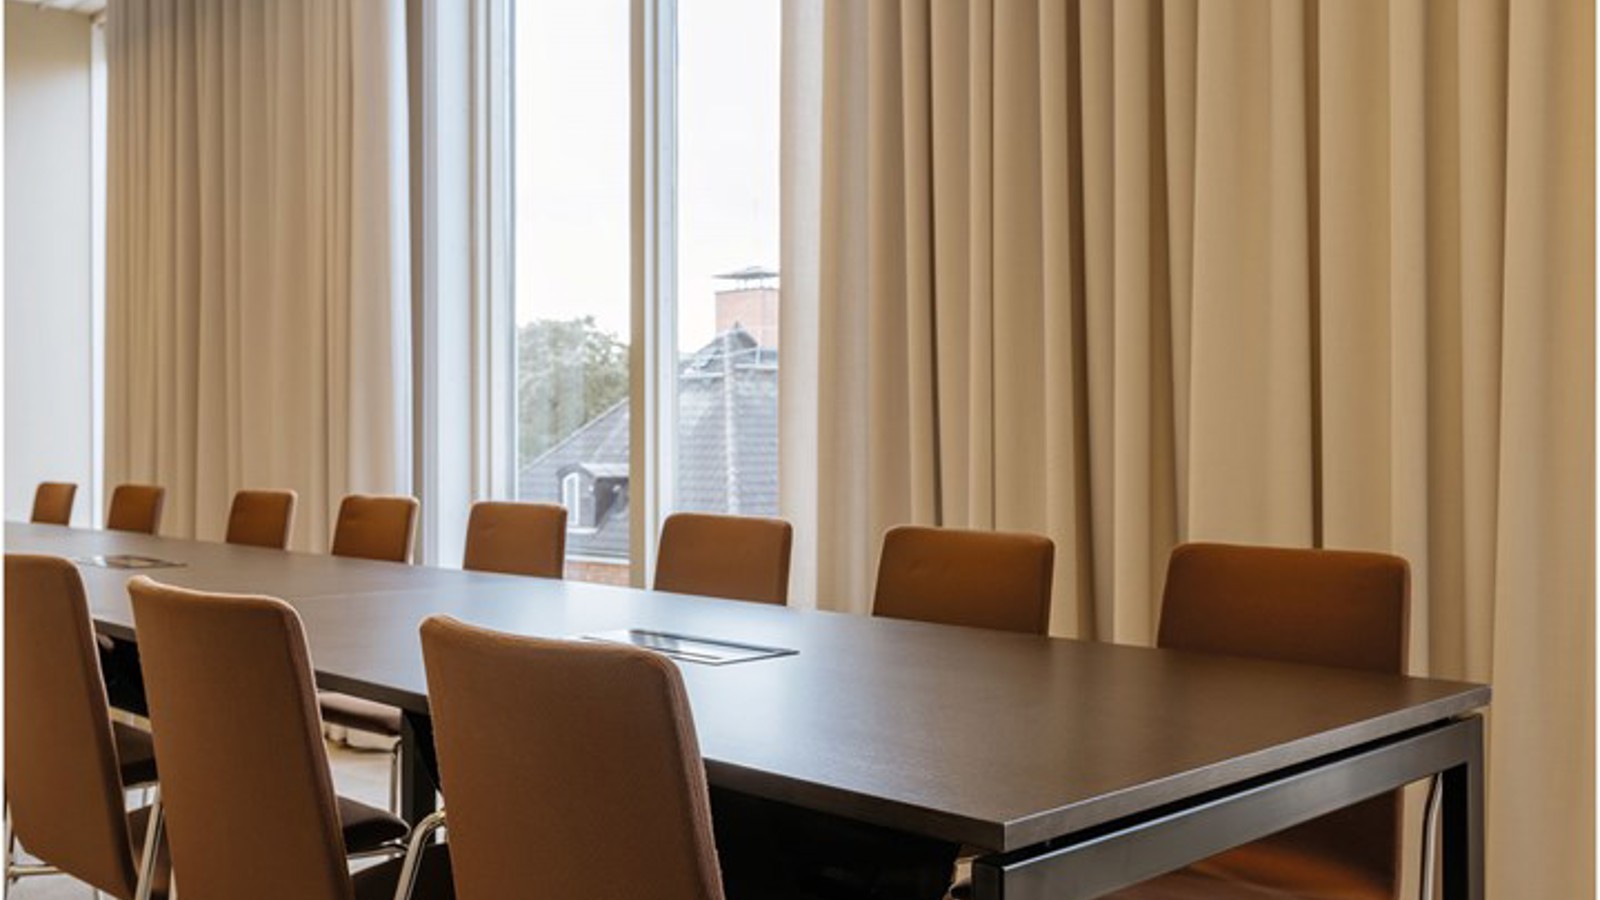 Conference room with board seating, brown table, brown chairs, large windows and light curtains